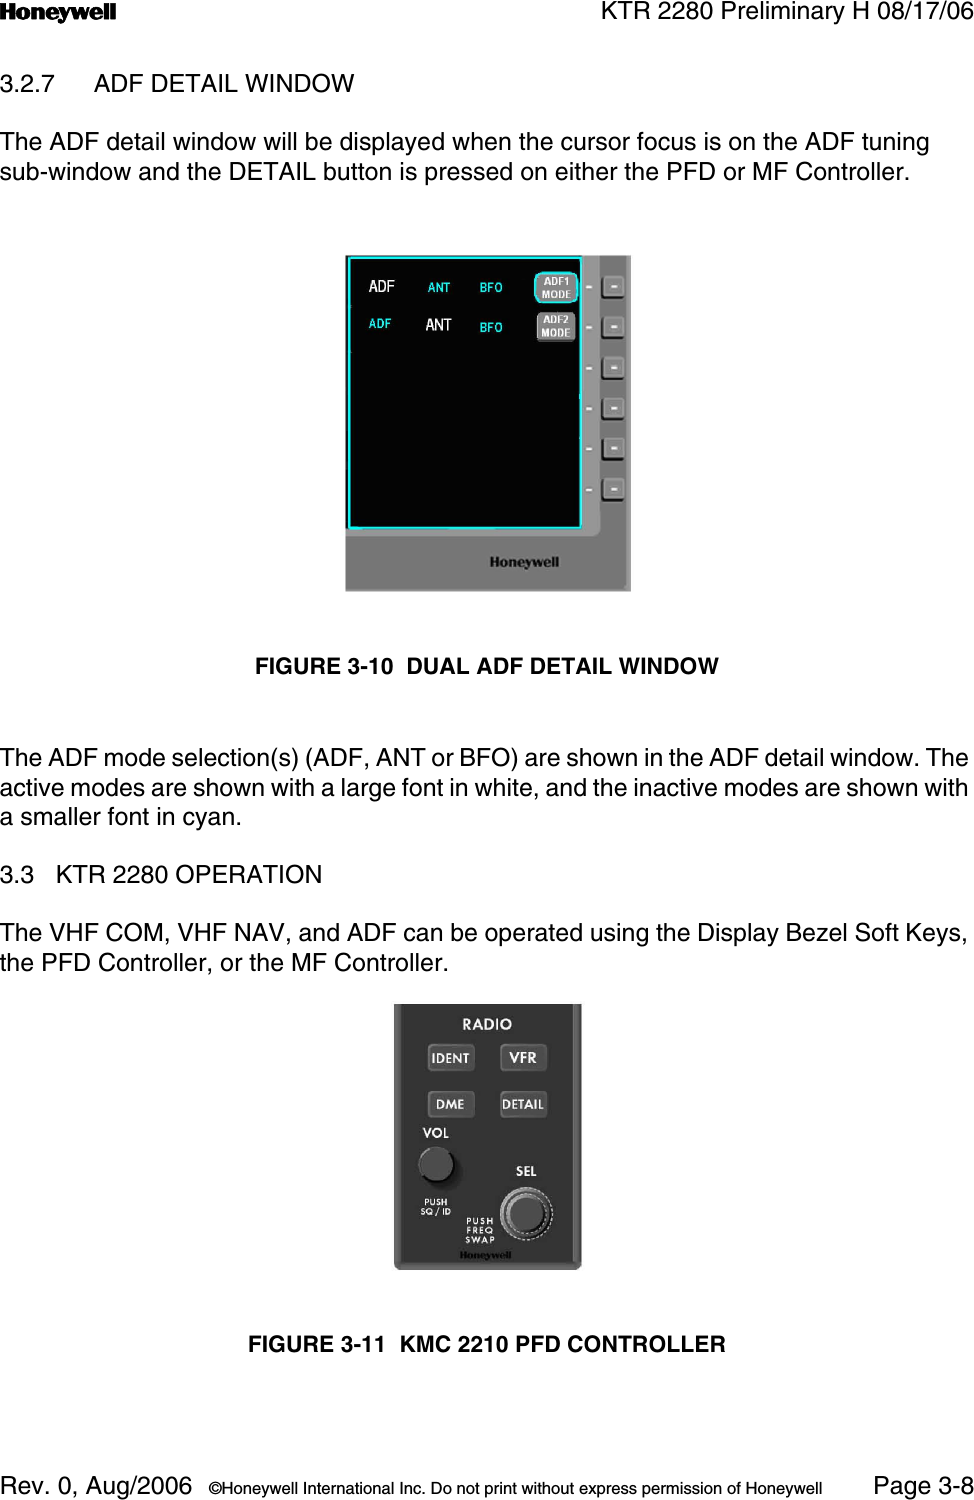 n KTR 2280 Preliminary H 08/17/06Rev. 0, Aug/2006  ©Honeywell International Inc. Do not print without express permission of Honeywell Page 3-83.2.7 ADF DETAIL WINDOWThe ADF detail window will be displayed when the cursor focus is on the ADF tuning sub-window and the DETAIL button is pressed on either the PFD or MF Controller.FIGURE 3-10  DUAL ADF DETAIL WINDOWThe ADF mode selection(s) (ADF, ANT or BFO) are shown in the ADF detail window. The active modes are shown with a large font in white, and the inactive modes are shown with a smaller font in cyan.3.3 KTR 2280 OPERATIONThe VHF COM, VHF NAV, and ADF can be operated using the Display Bezel Soft Keys, the PFD Controller, or the MF Controller.FIGURE 3-11  KMC 2210 PFD CONTROLLER